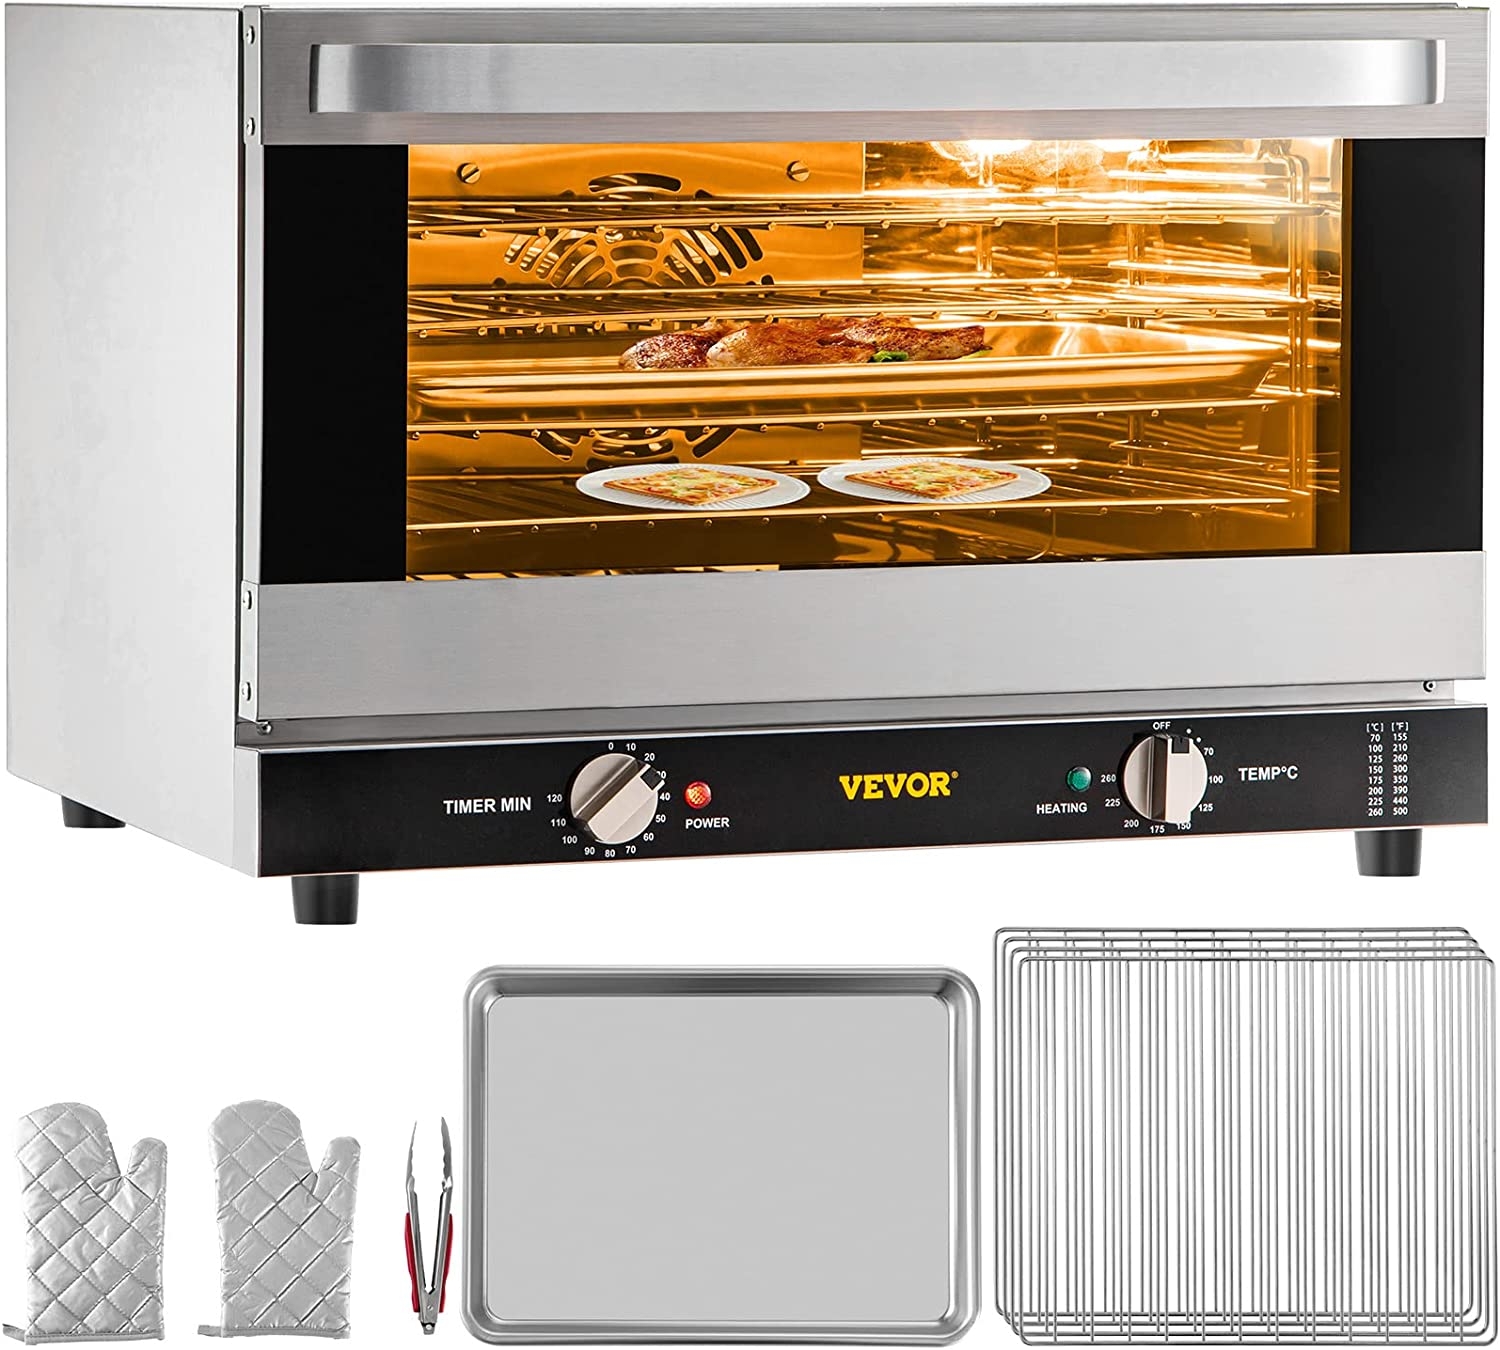 VEVOR Commercial Convection Oven, 47L/43Qt, Half-Size Conventional Oven Countertop, 1600W 4-Tier Toaster w/ Front Glass Door,